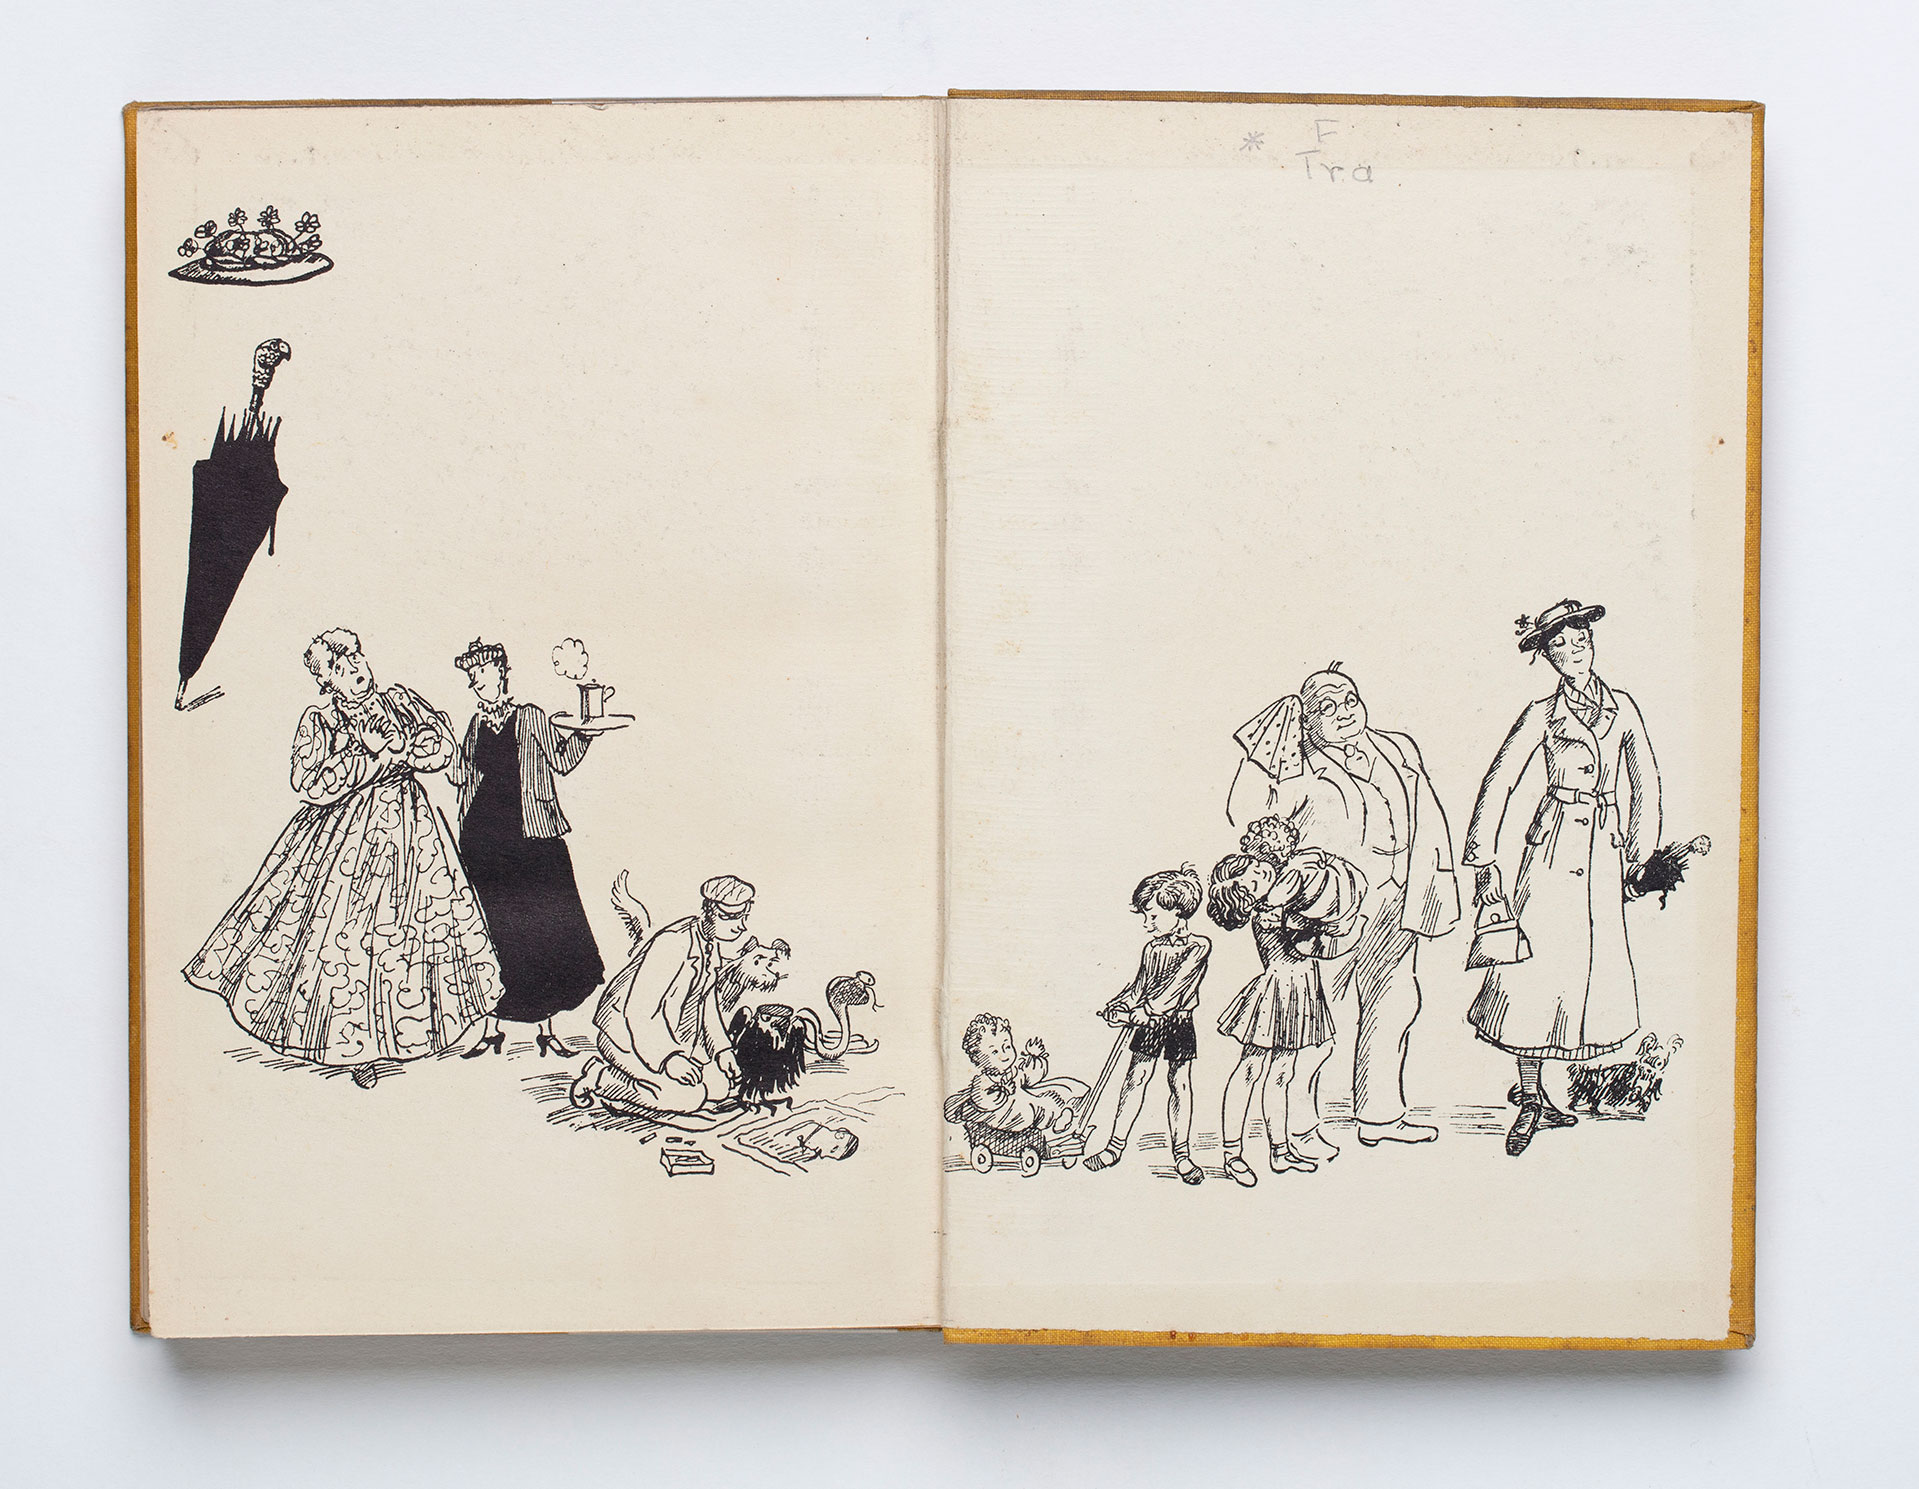 Endpapers with an illustration from Mary Poppins.